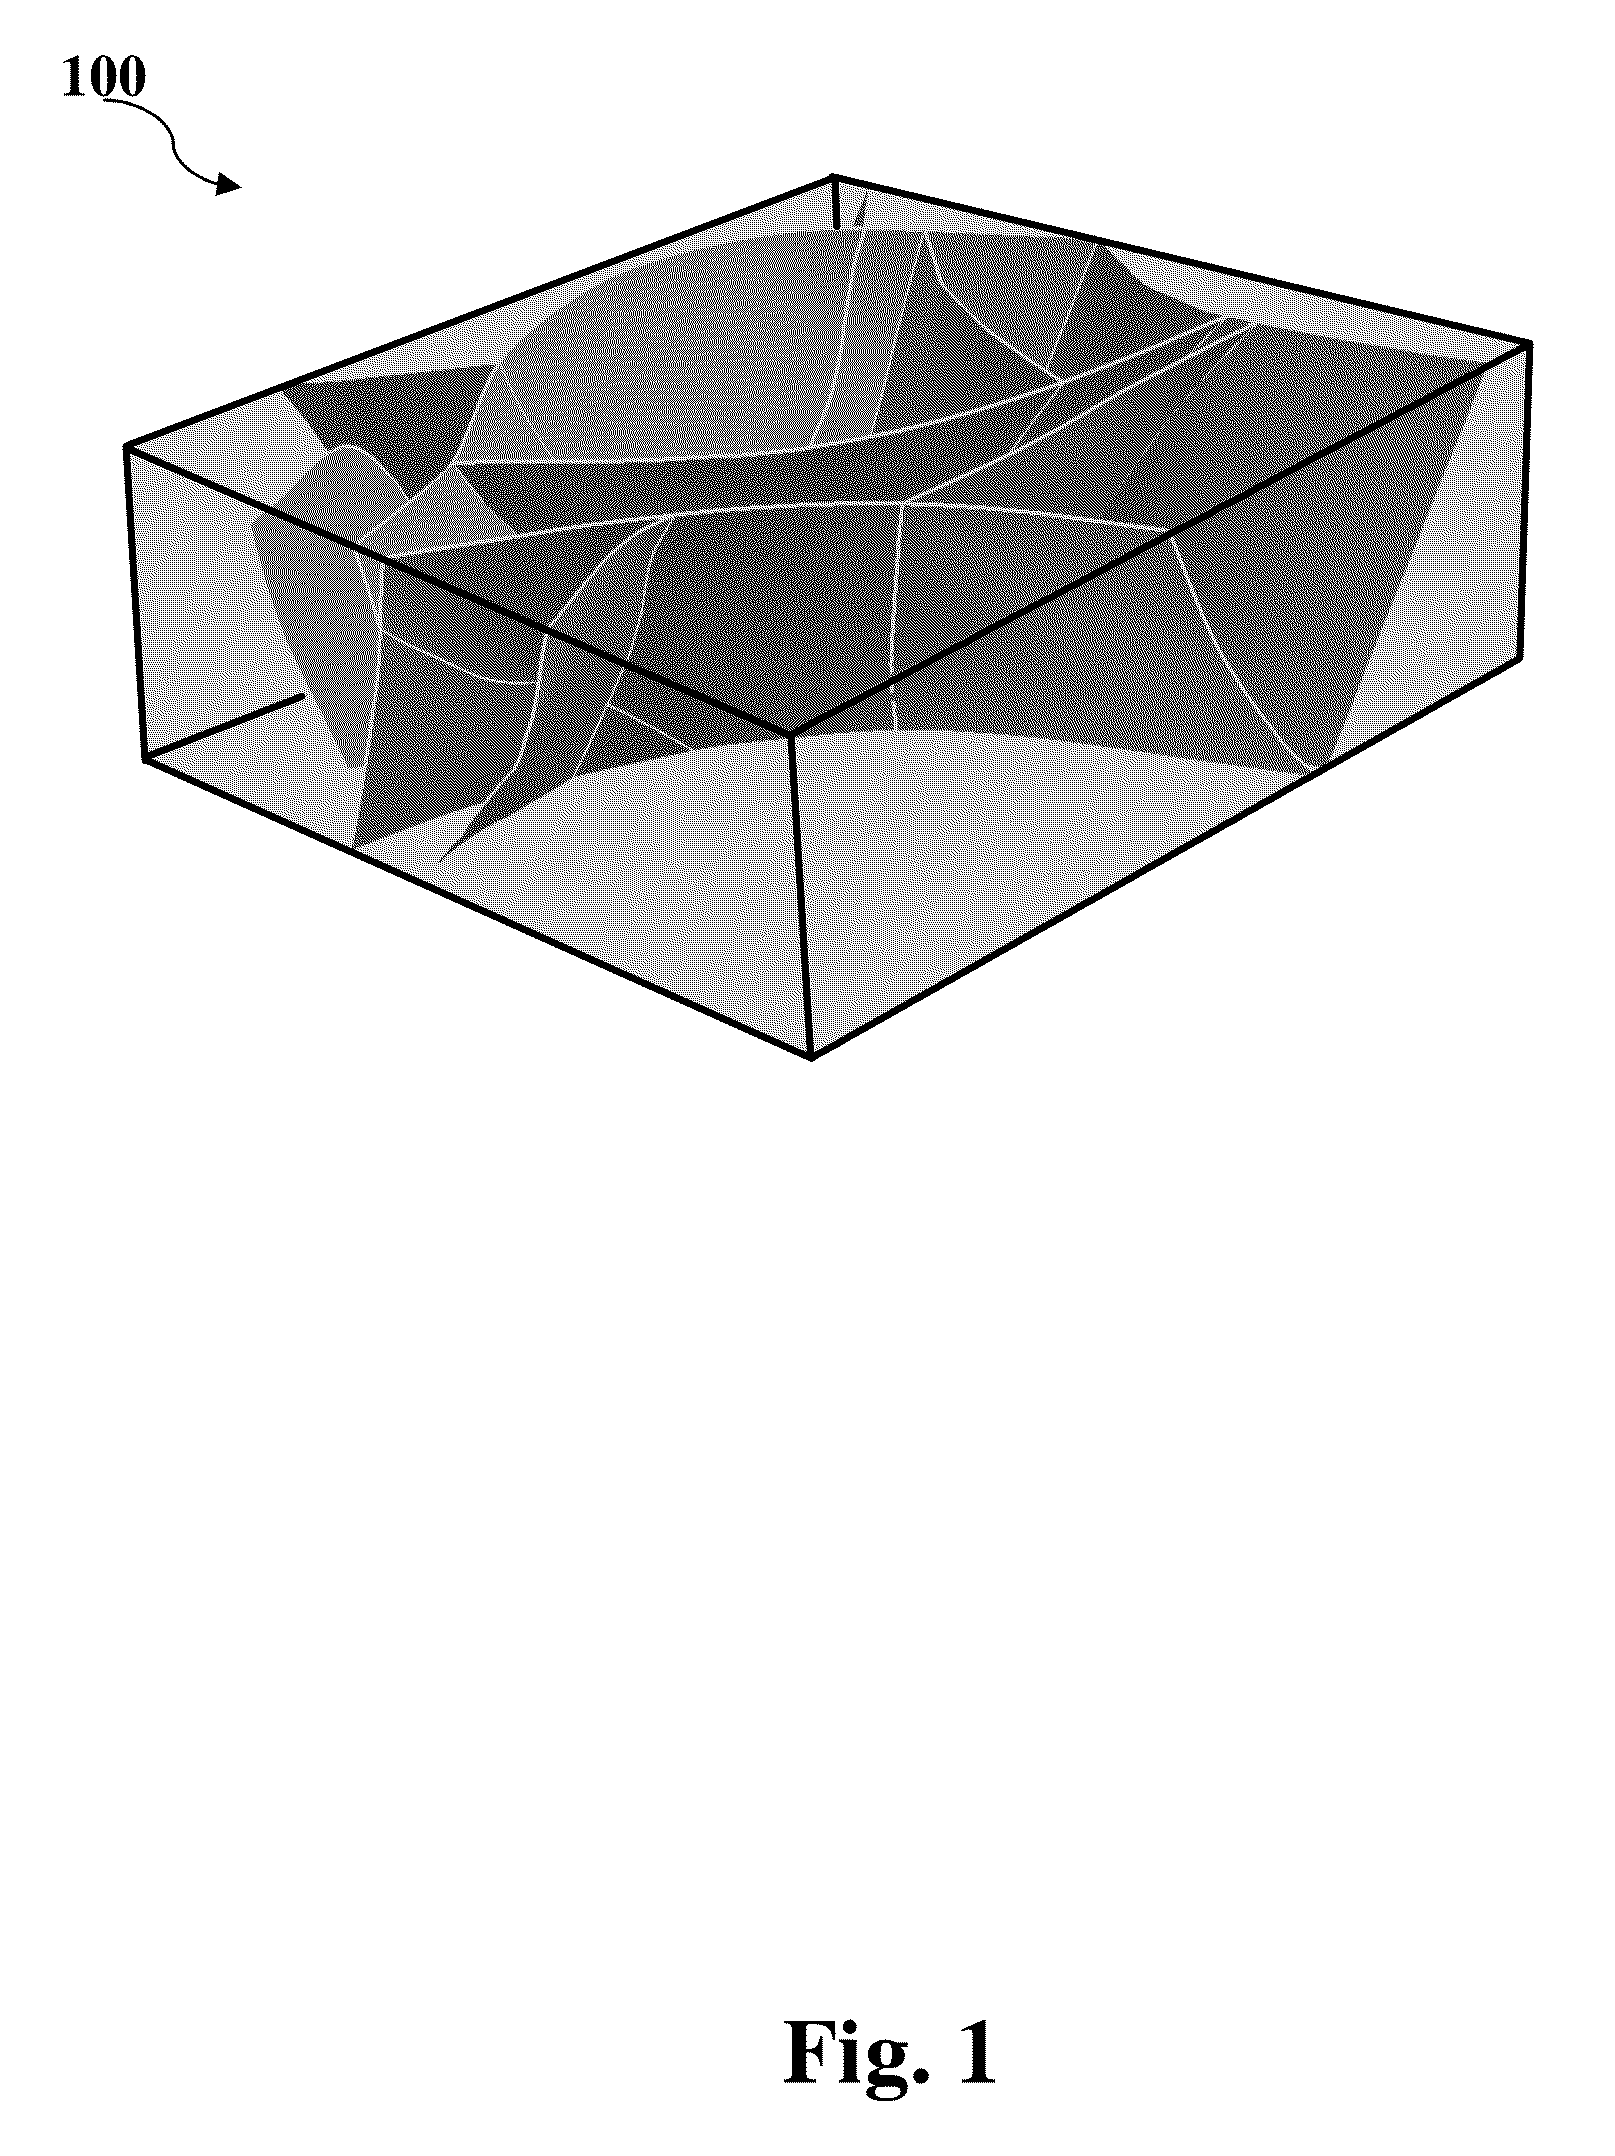 System and method for generating an implicit model of geological horizons